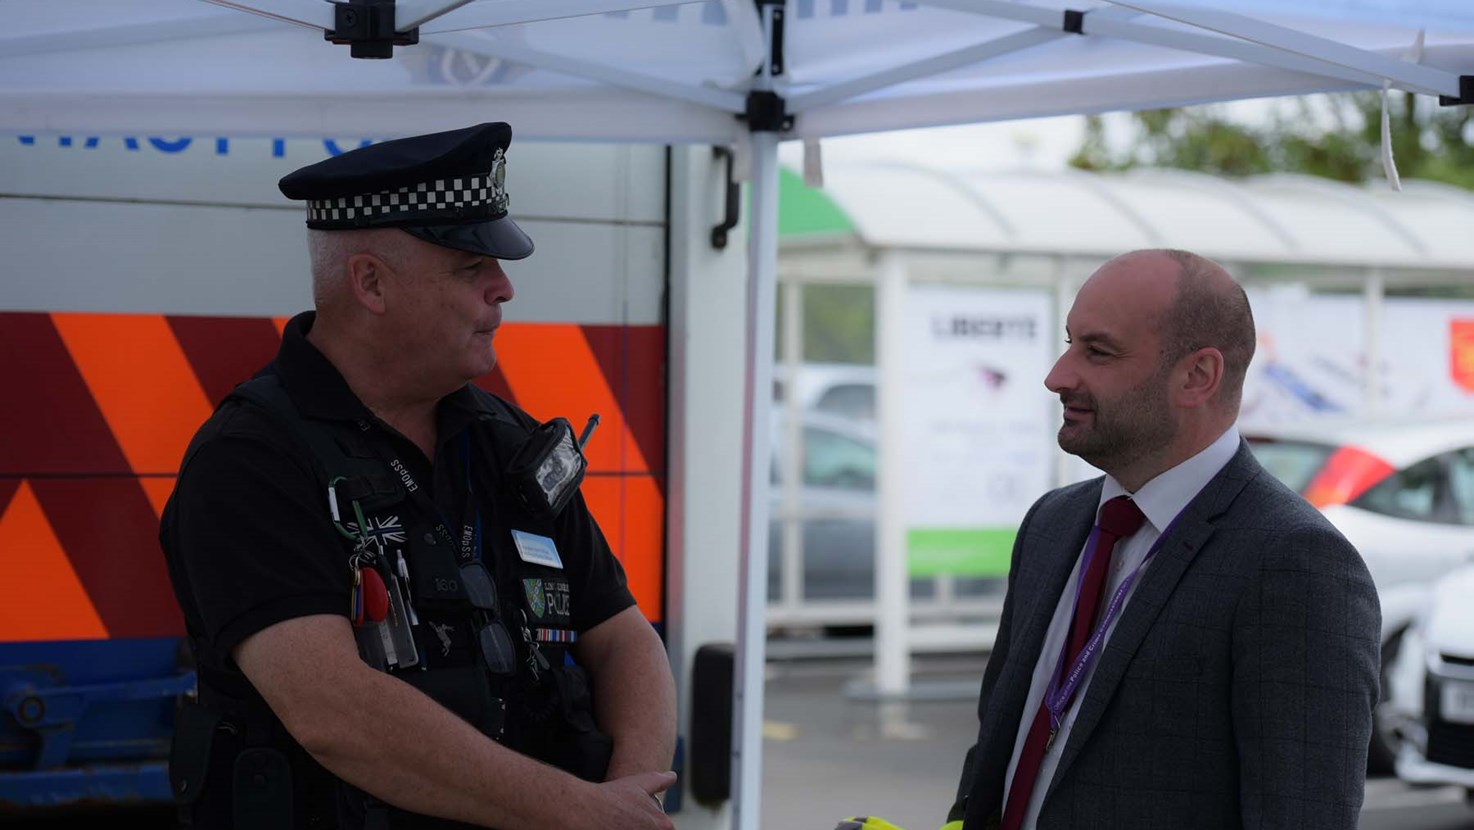 Joining forces to tackle rural crime